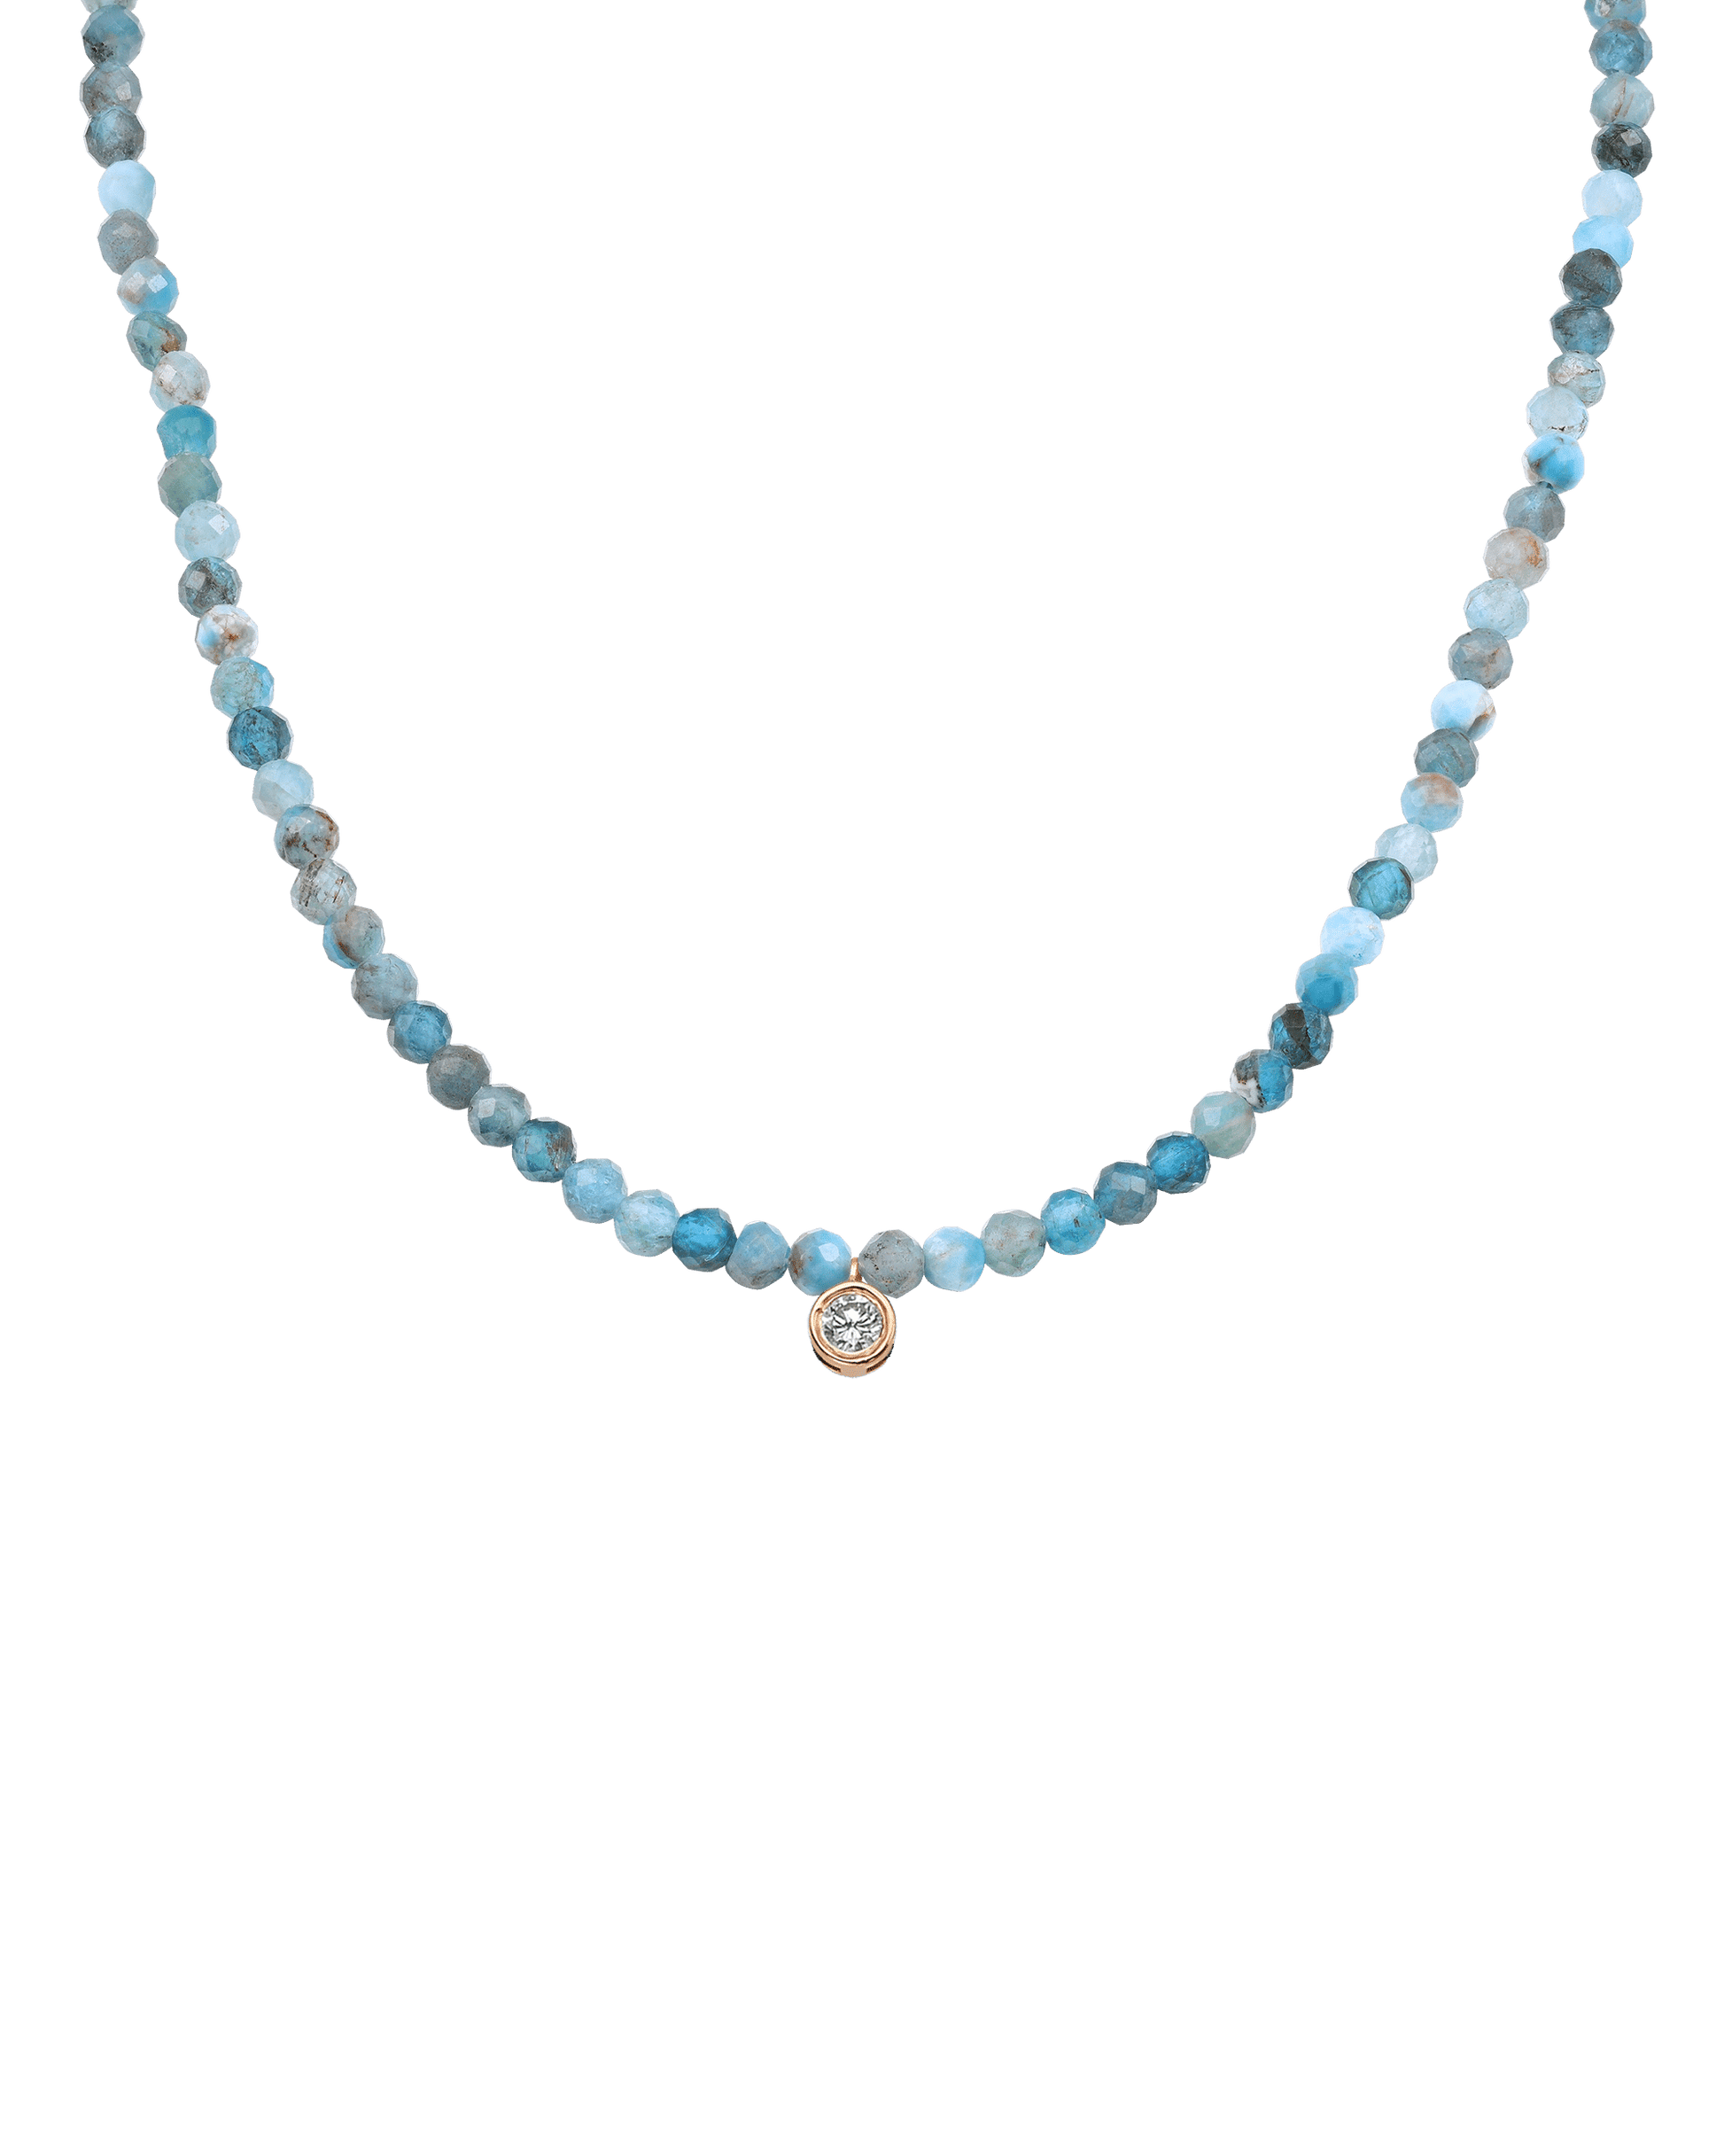 The Gemstone & Diamond Necklace - 14K Rose Gold Necklaces 14K Solid Gold Natural Turquoise Large: 0.1ct 14"